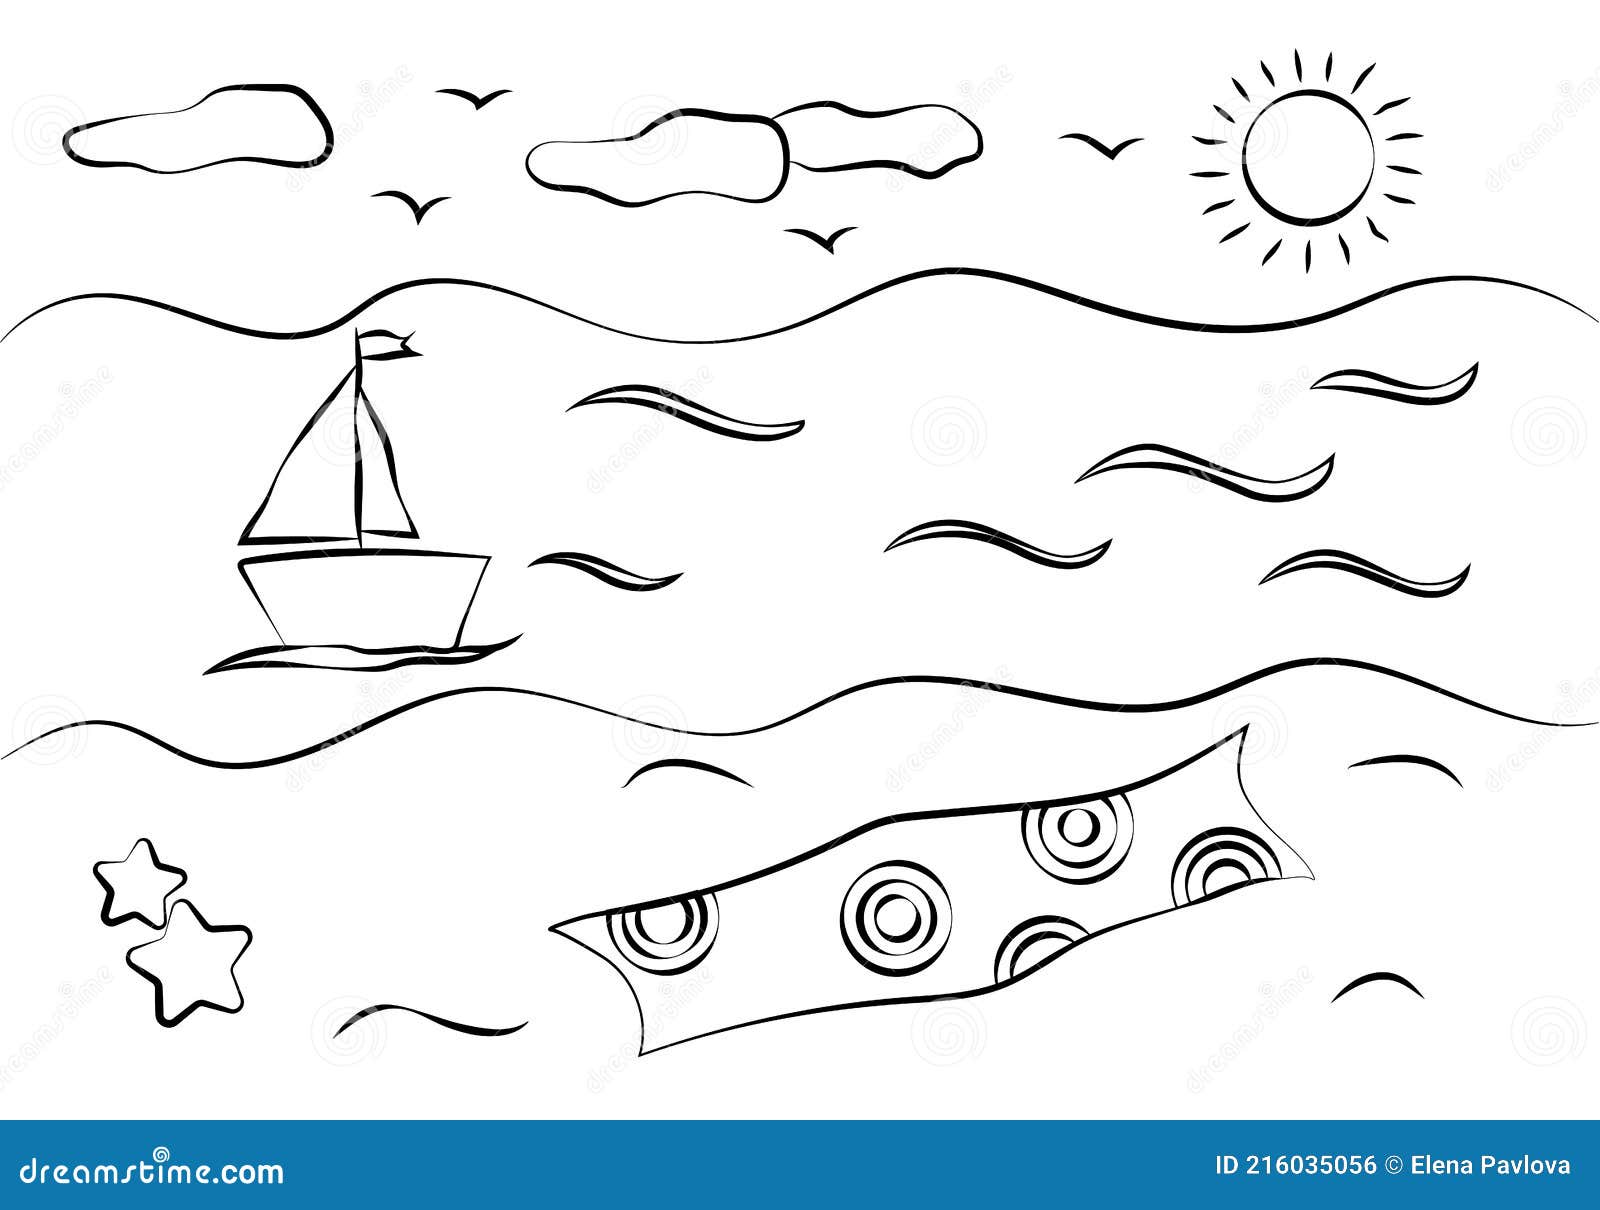 Summer Beach, Sea and Sailboat Child`s Drawing. Summer Item Doodle